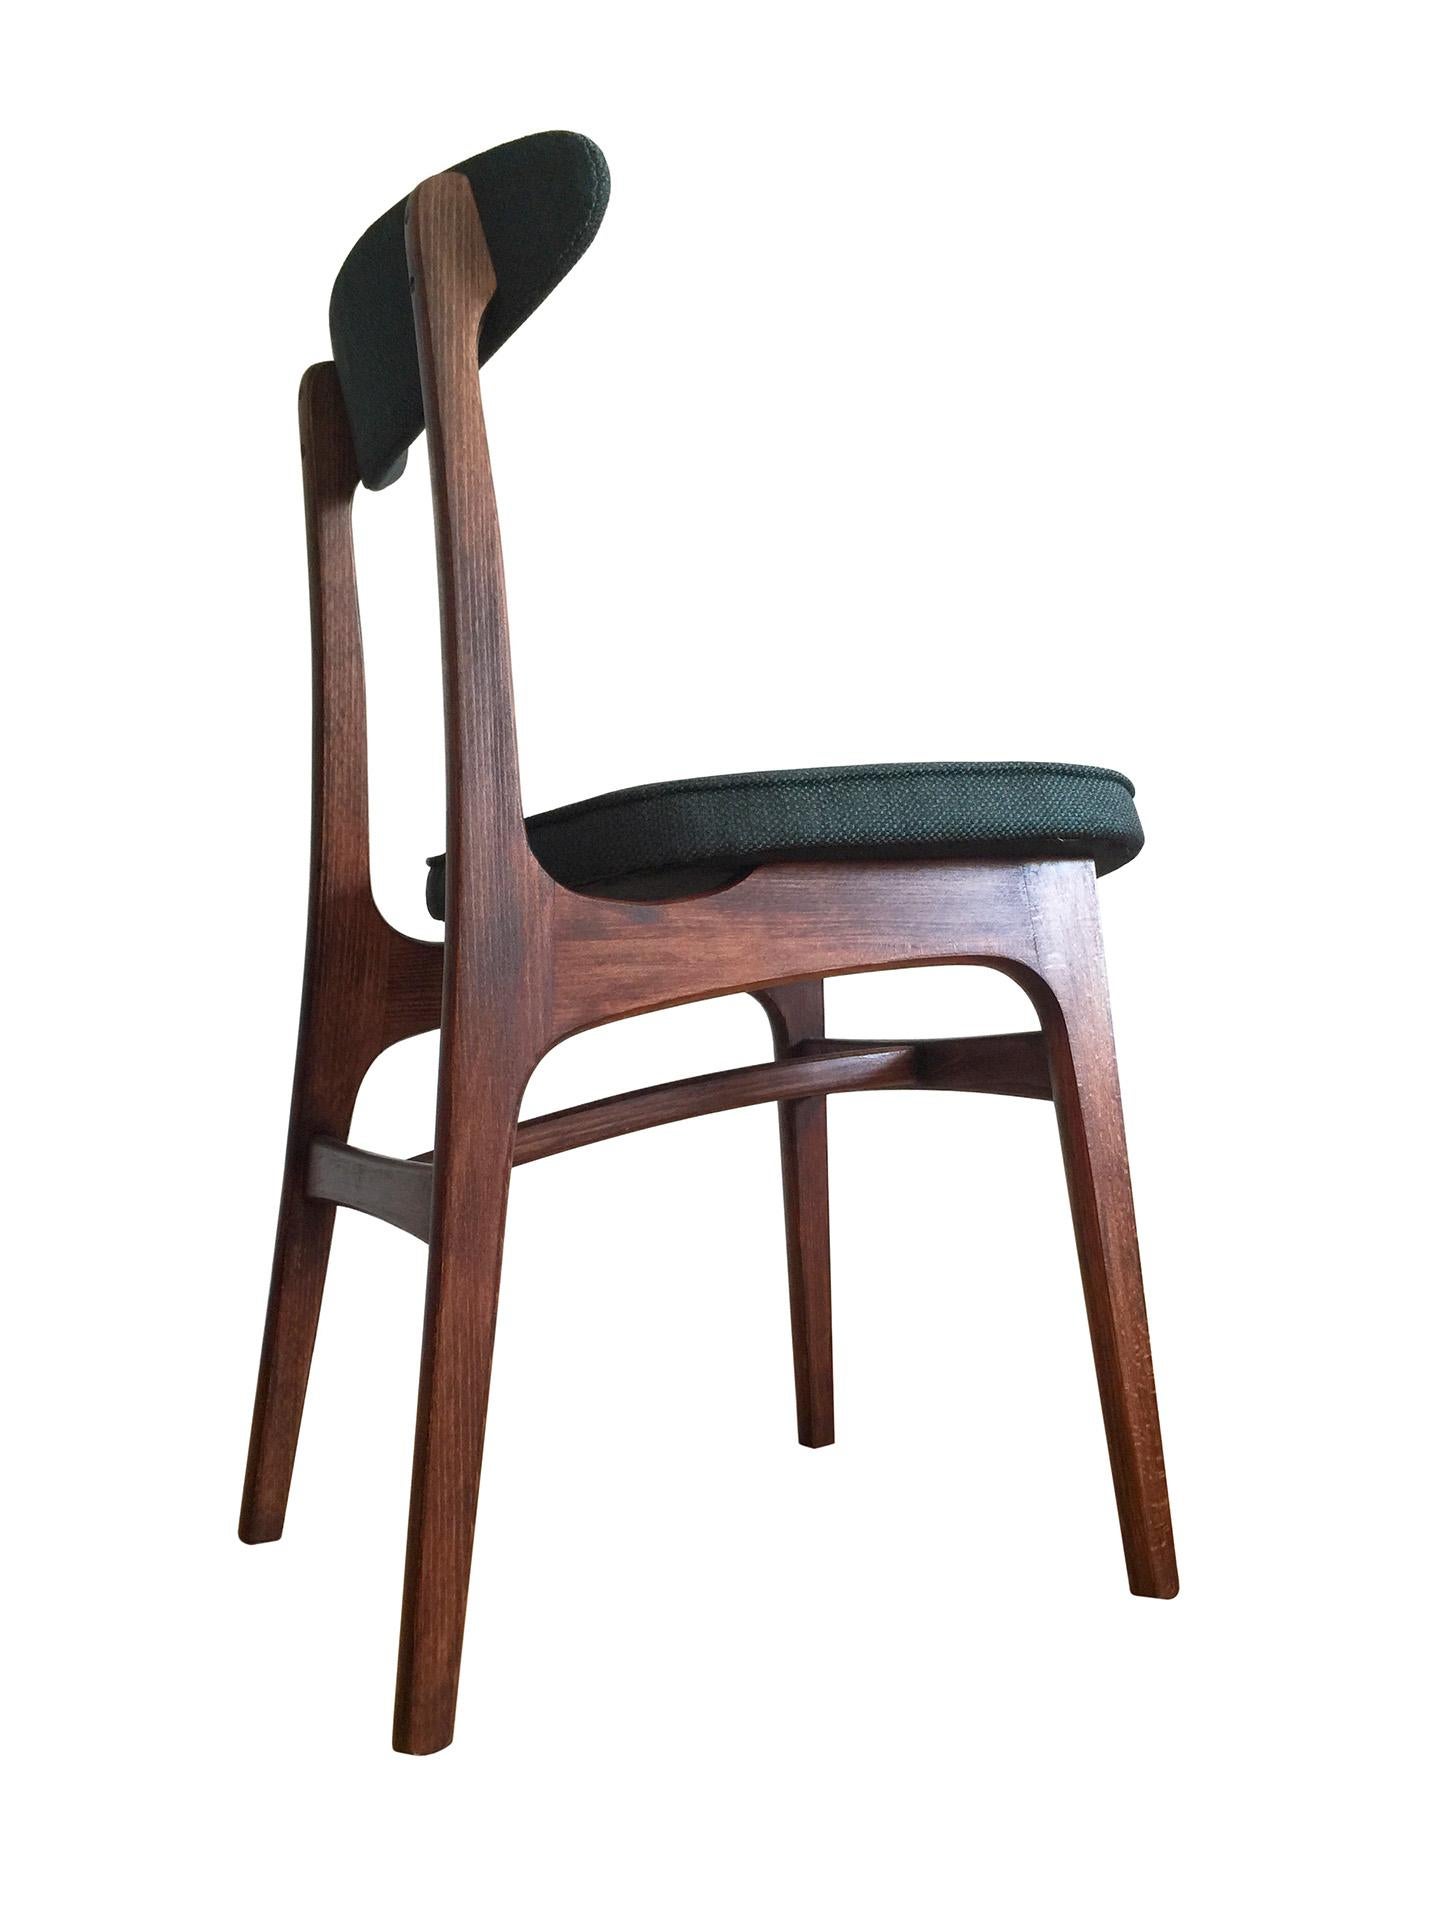 This set of four chairs, model 200-190, was designed by Rajmund Teofil Halas and manufactured in Poland in the 1960s. It is one of the most recognizable projects of Polish design. The chairs have a simple, modernist silhouette. The construction is